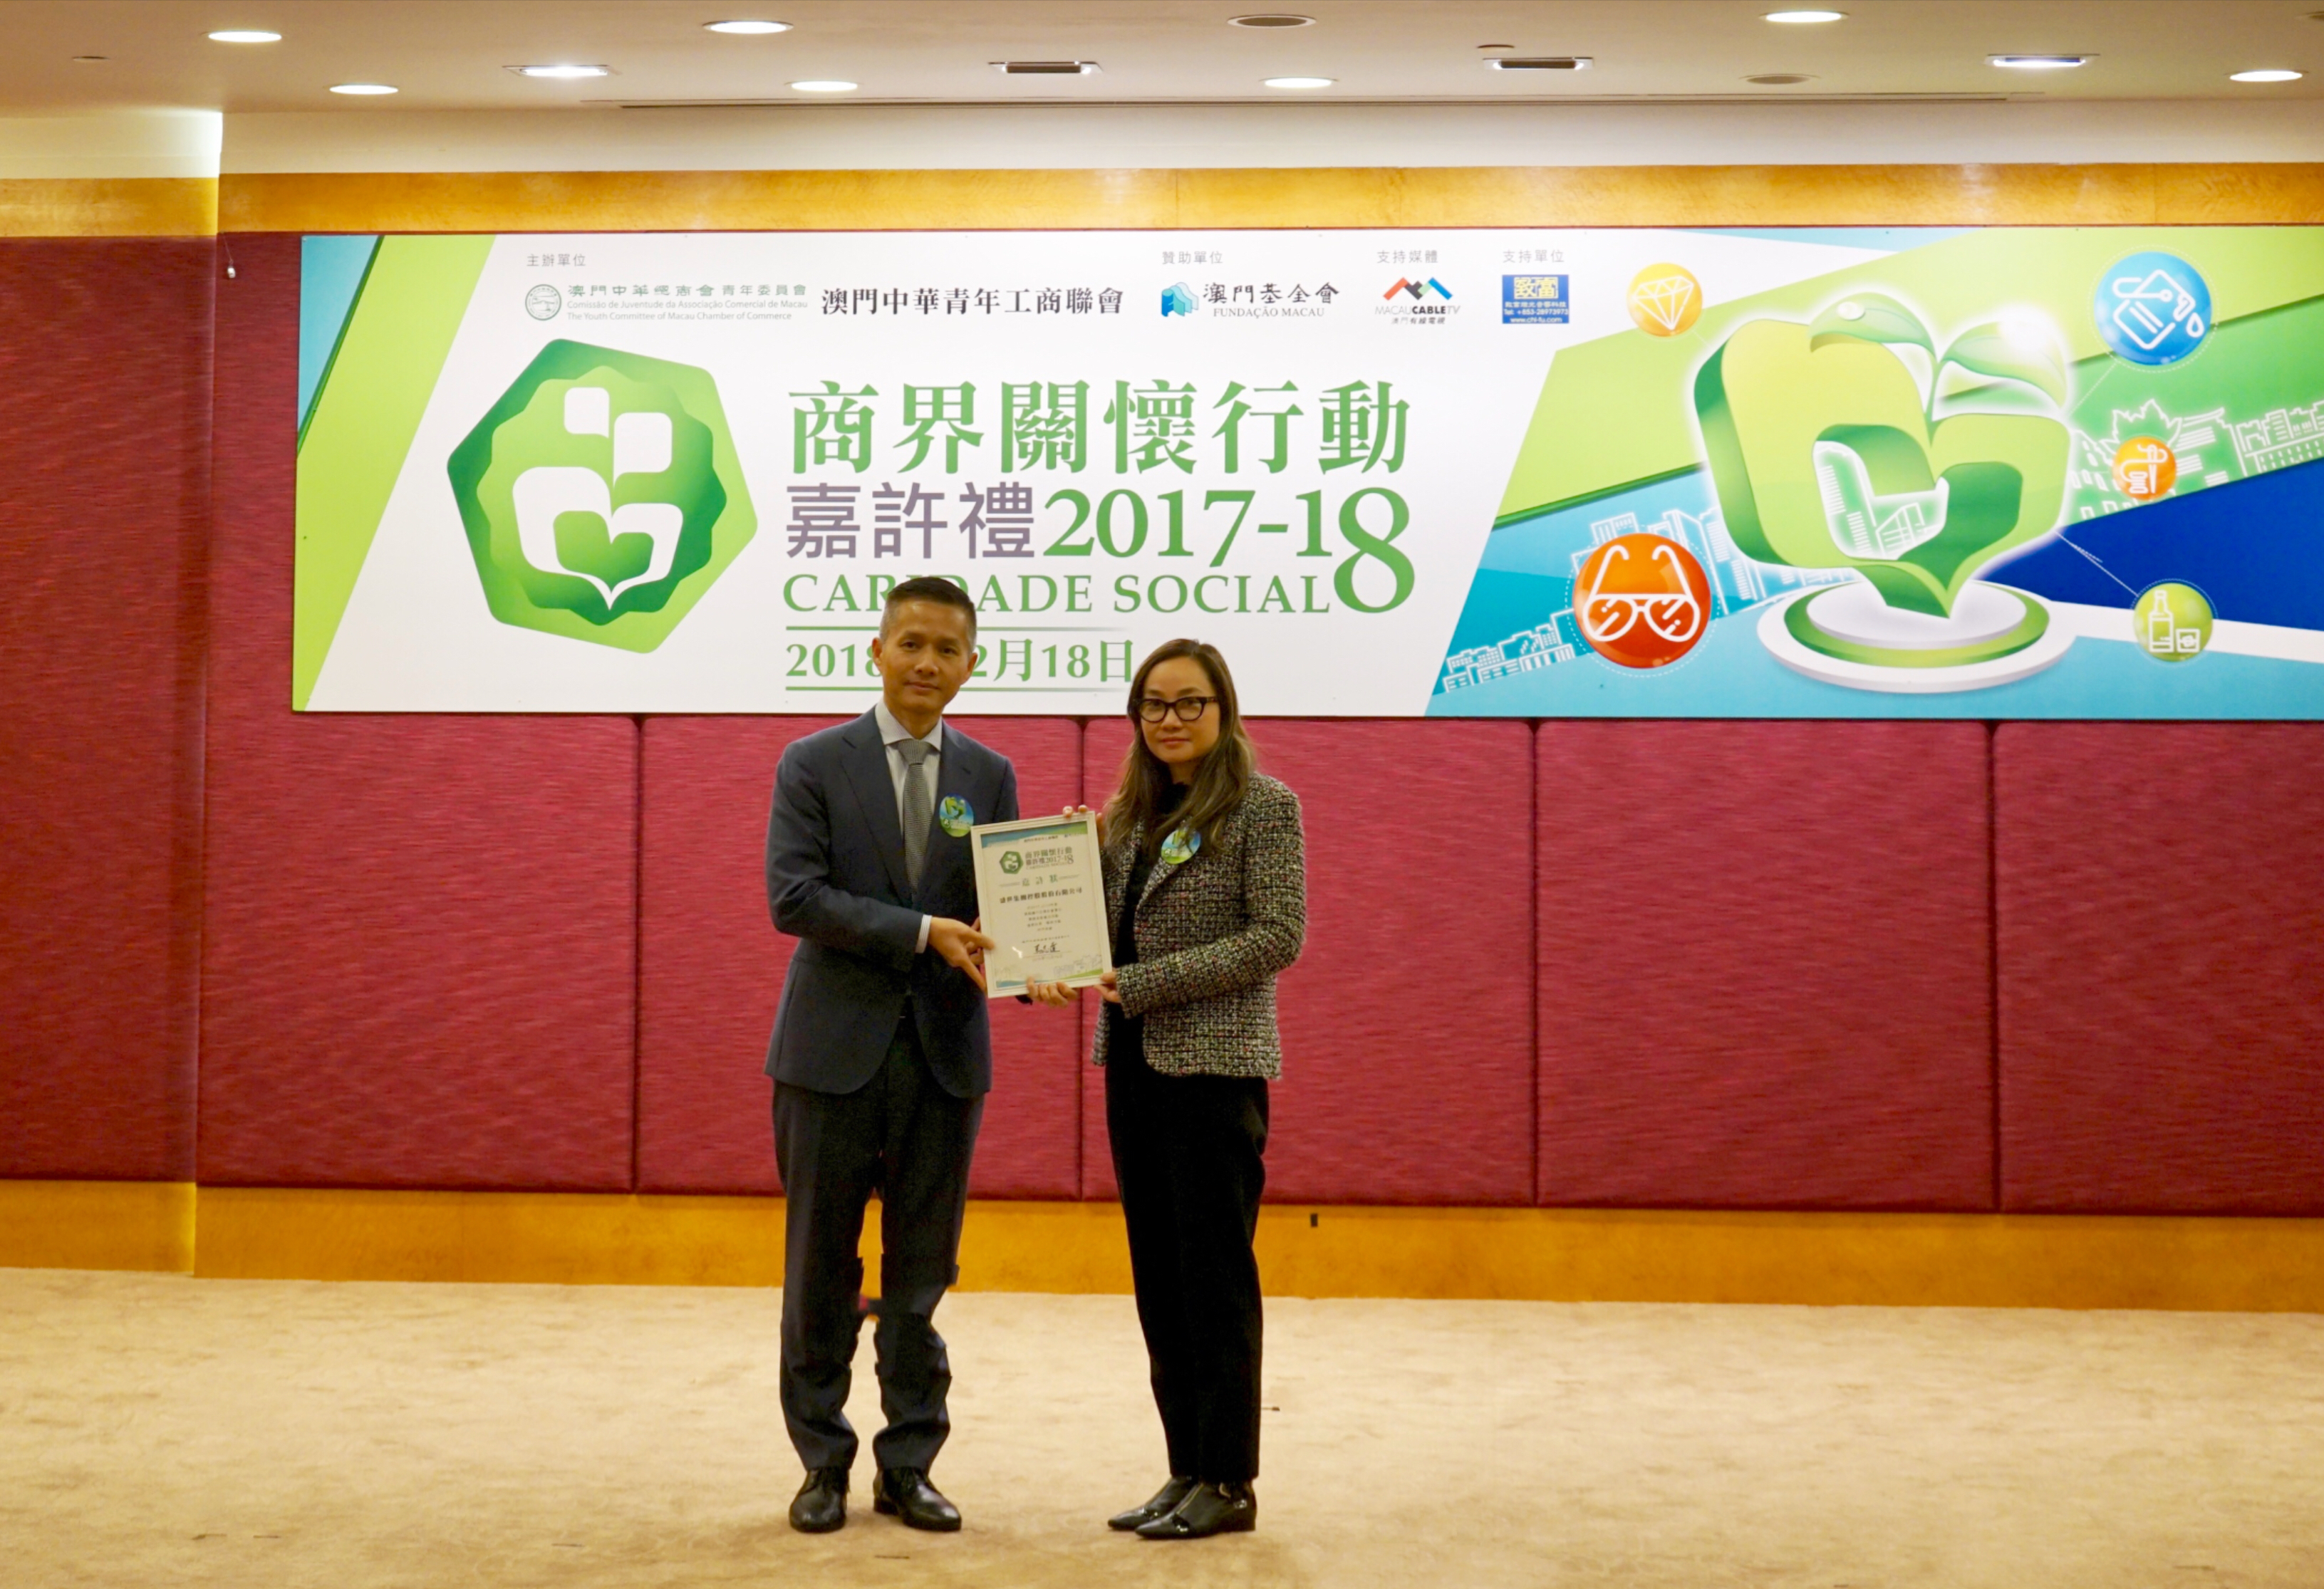 CESL Asia receives a Caridade Social Award by The Youth Committee of Macau Chamber of Commerce 2018